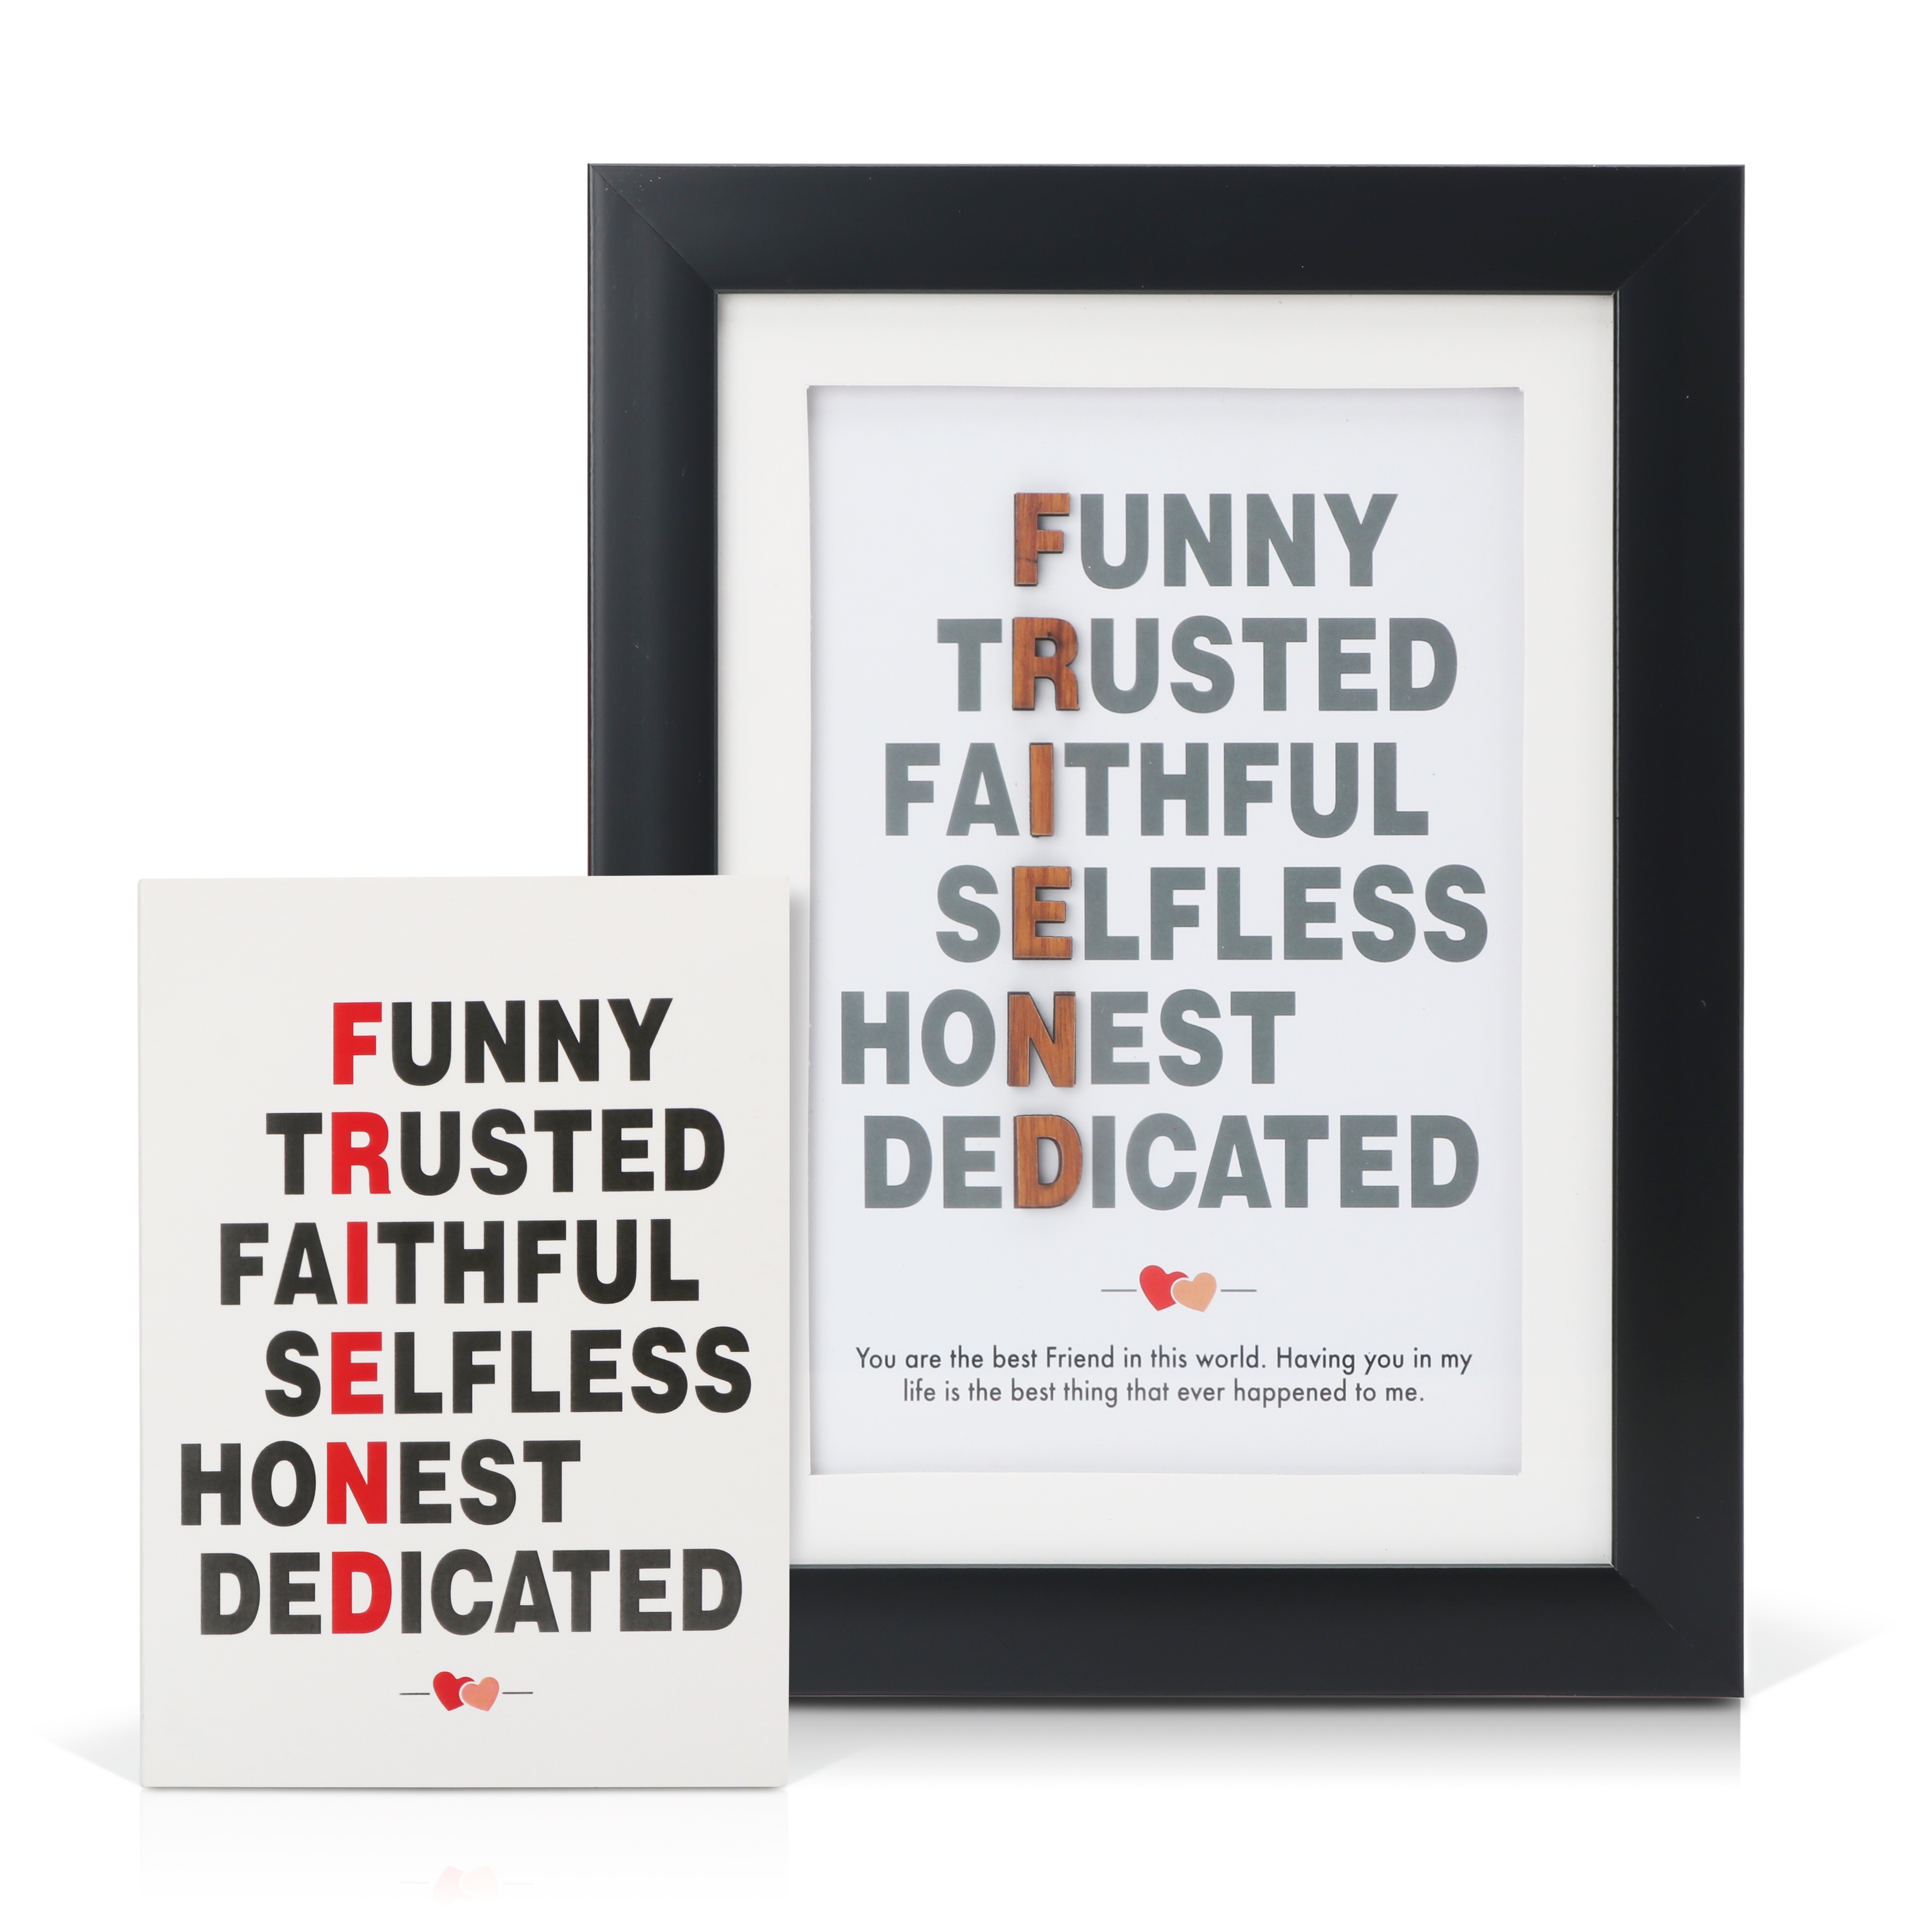 Archies | Archies Quotation Photo Frame with Greeting Card for Friend 2